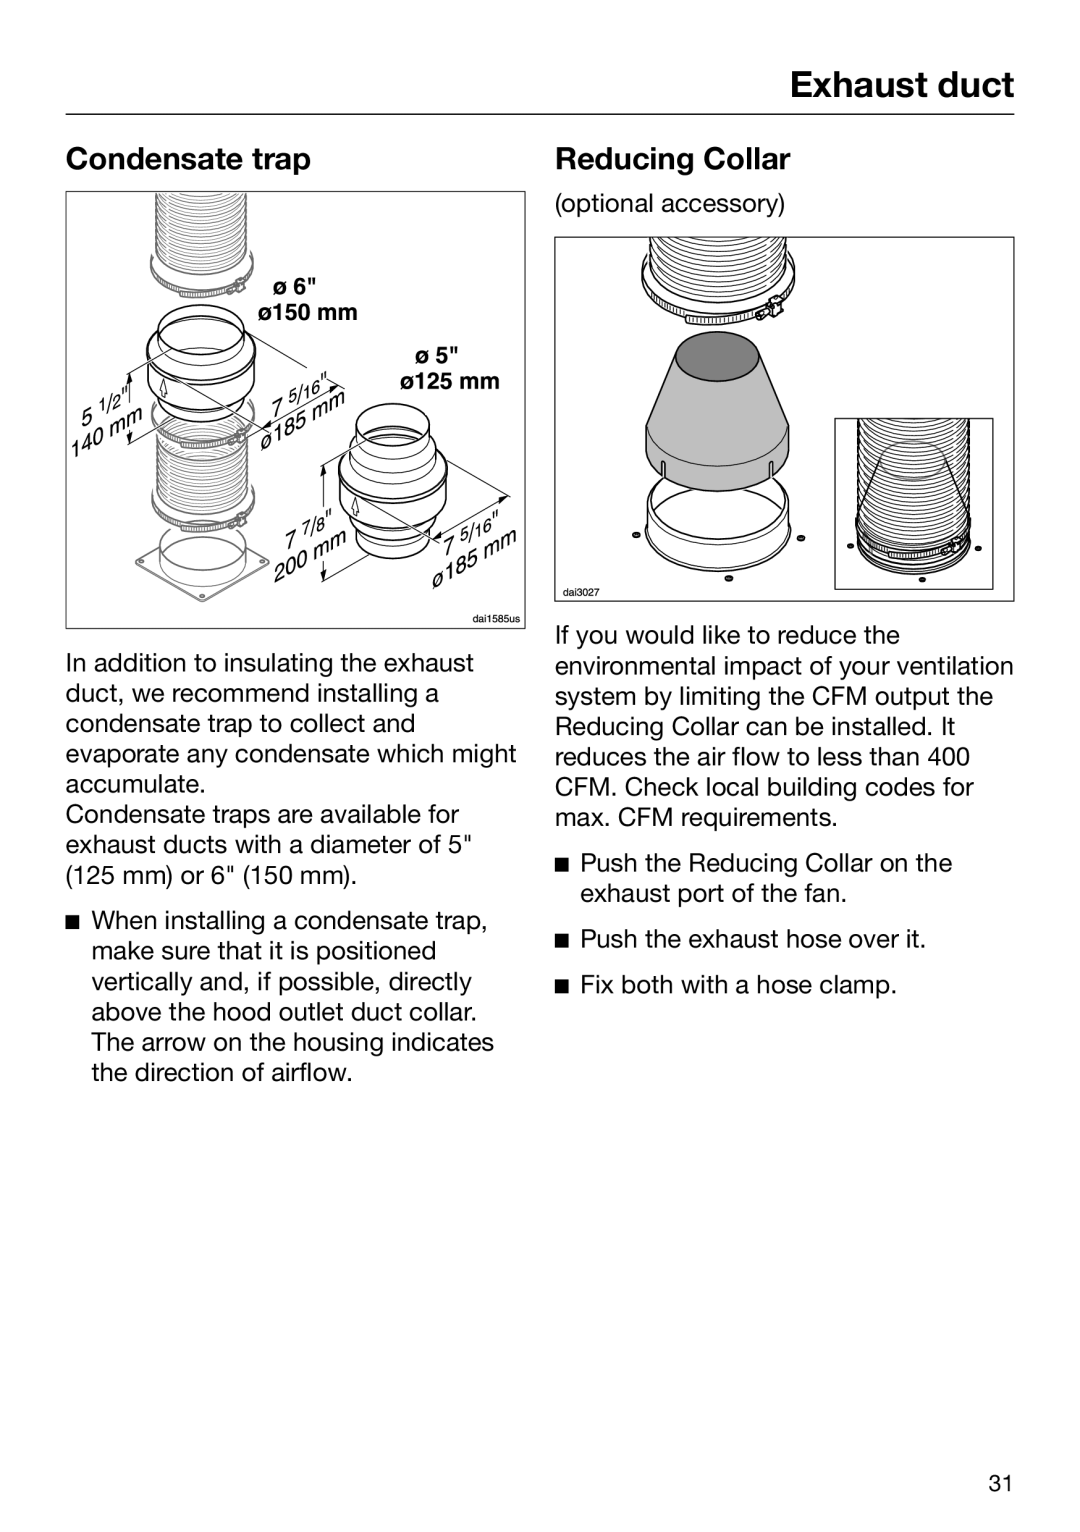 Miele 09 968 280 installation instructions Condensate trap, Reducing Collar, Exhaust duct 